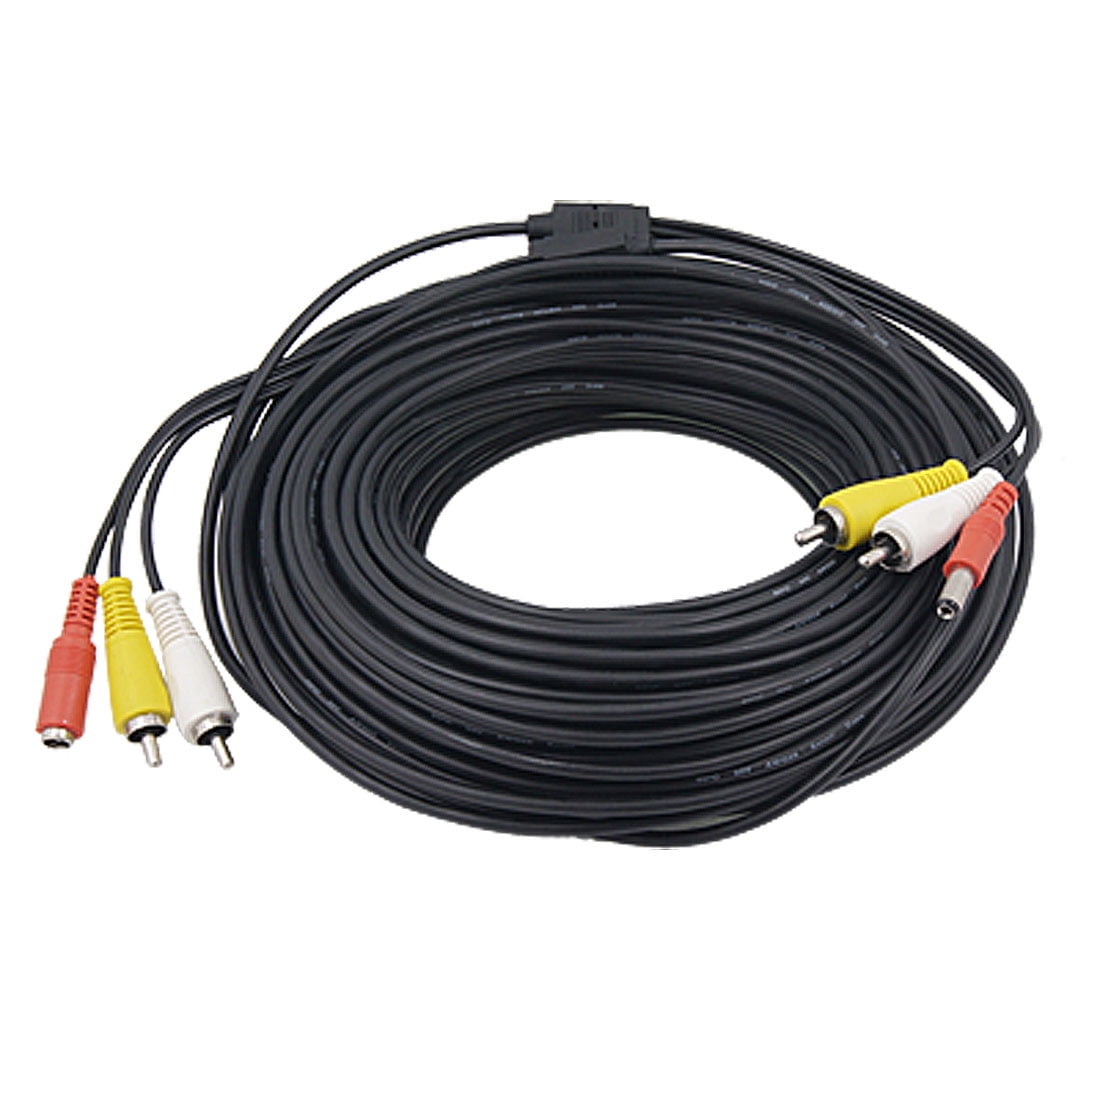 15m CCTV Security Camera Lead AV Audio Video RCA DVR Power Phono Extension Cable 